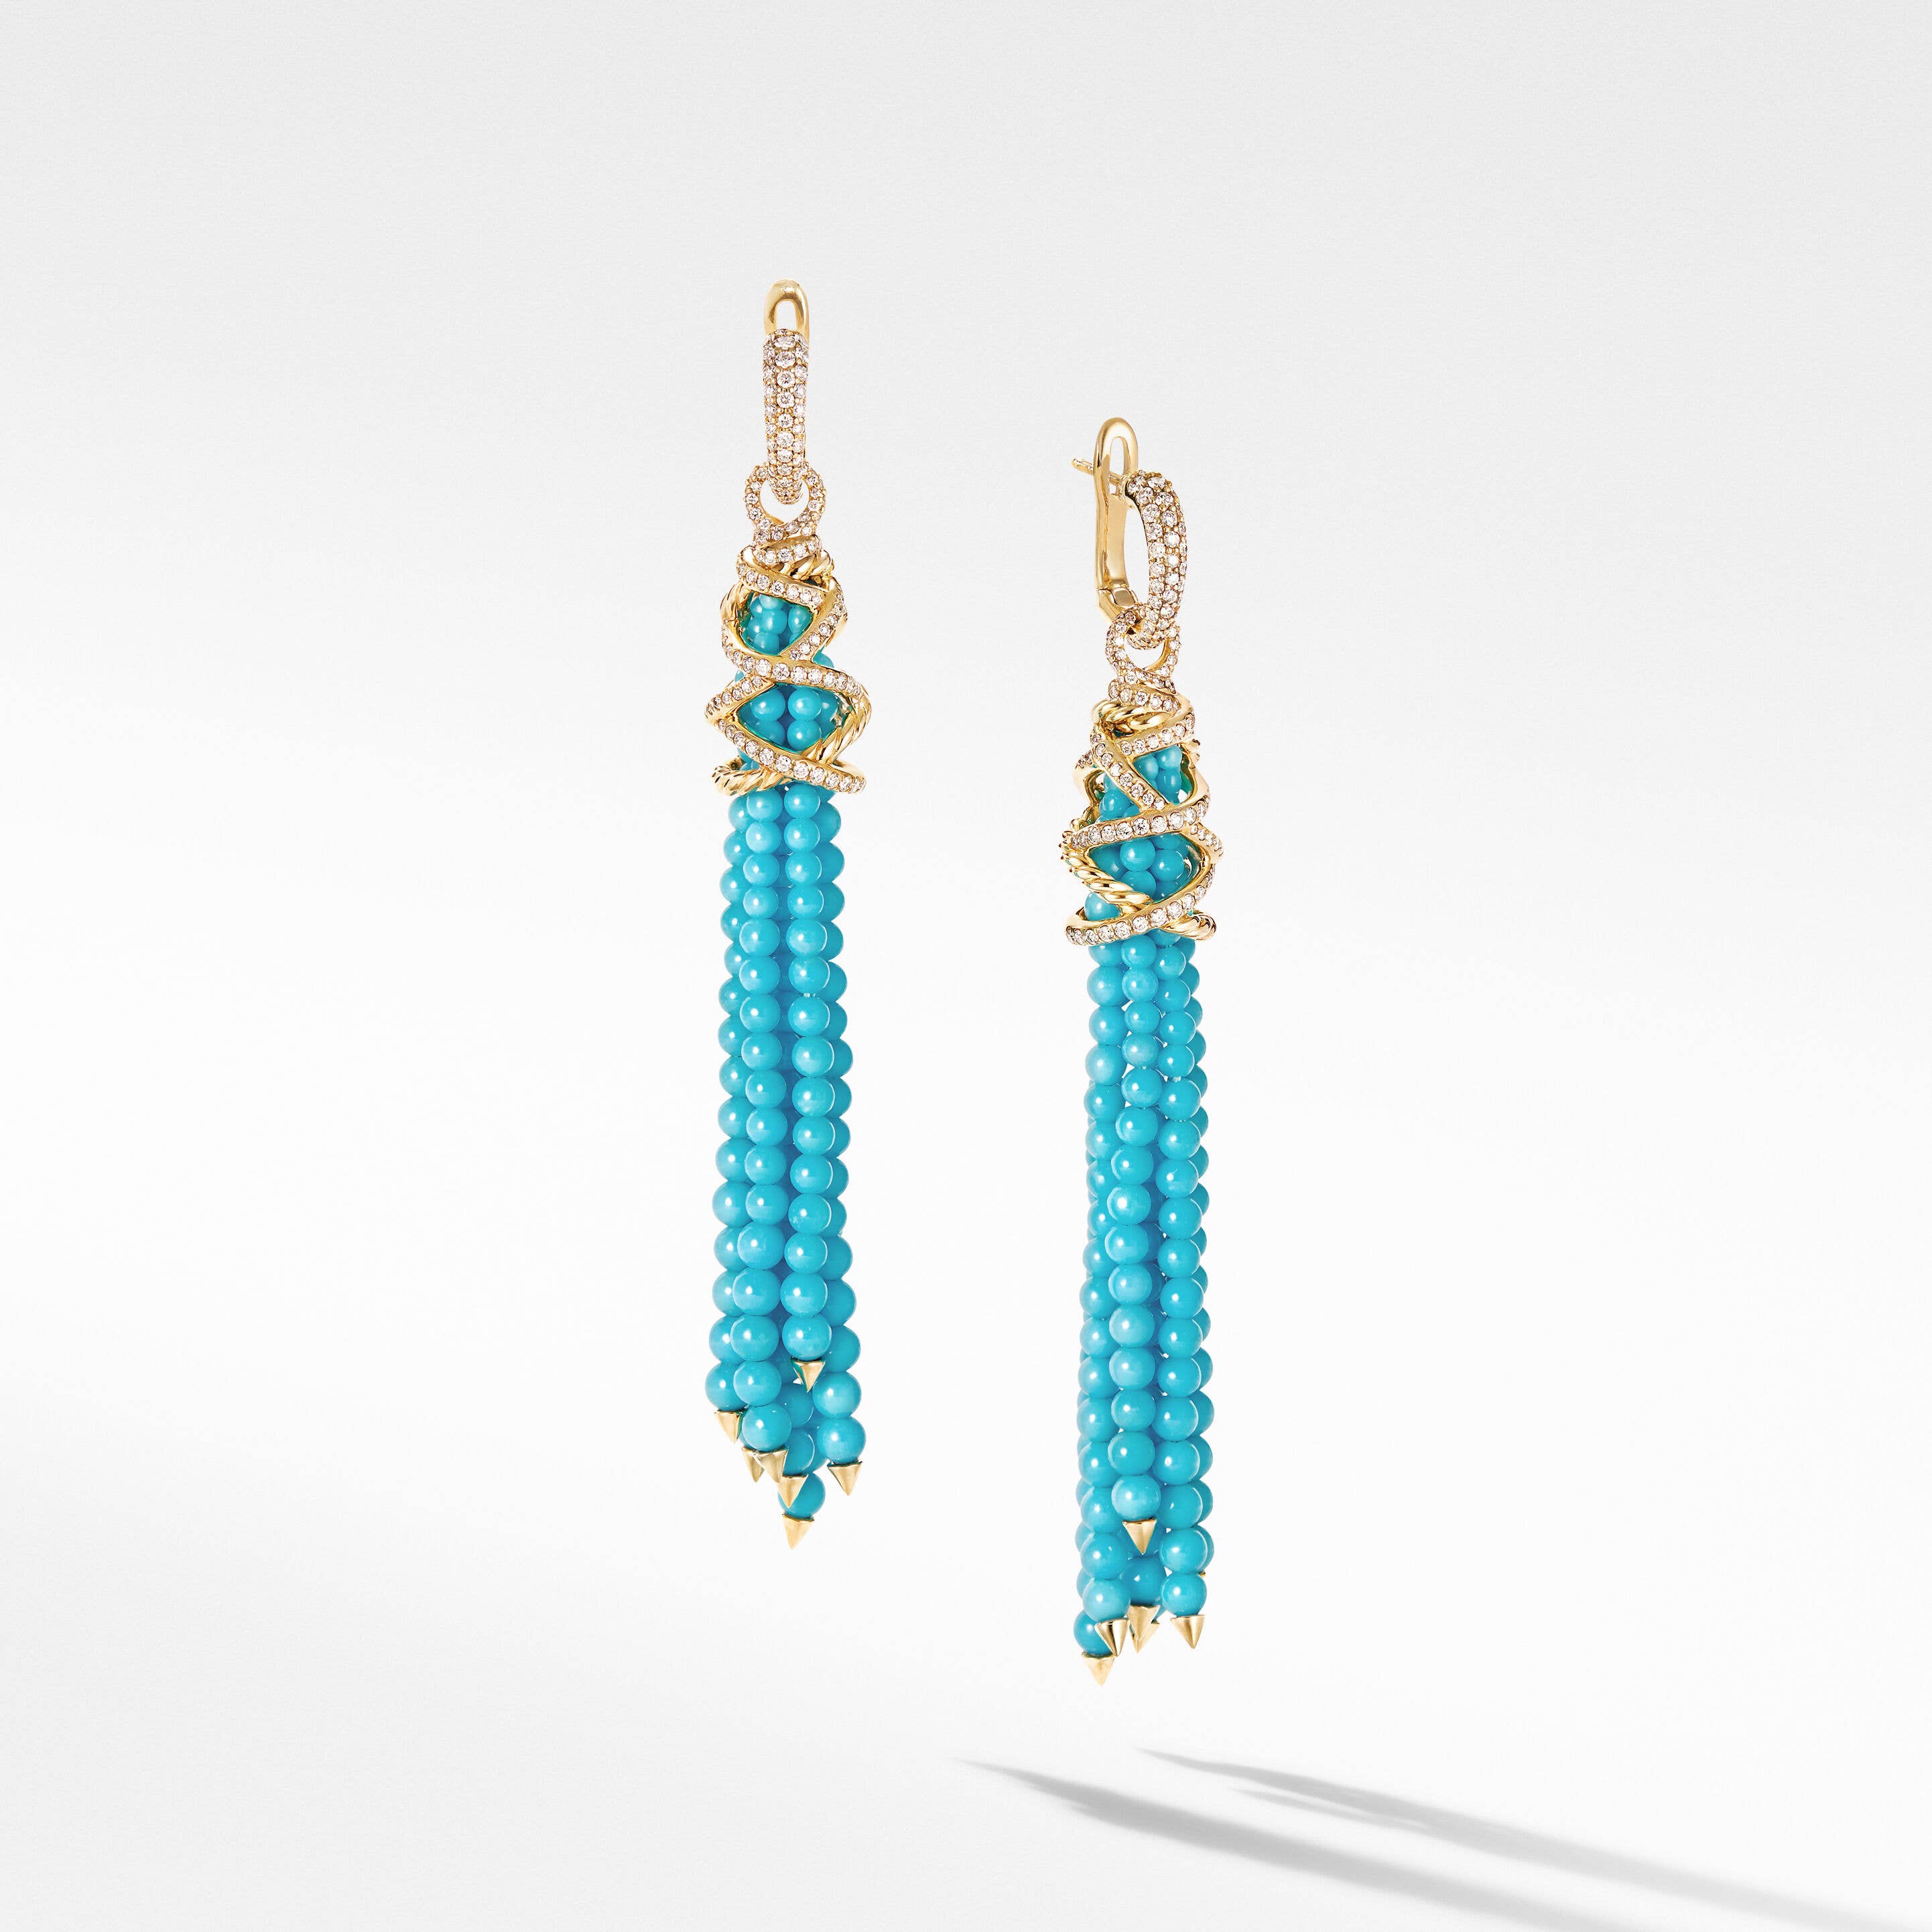 Helena Tassel Earrings with Turquoise, Pavé Diamonds and 18K Yellow Gold